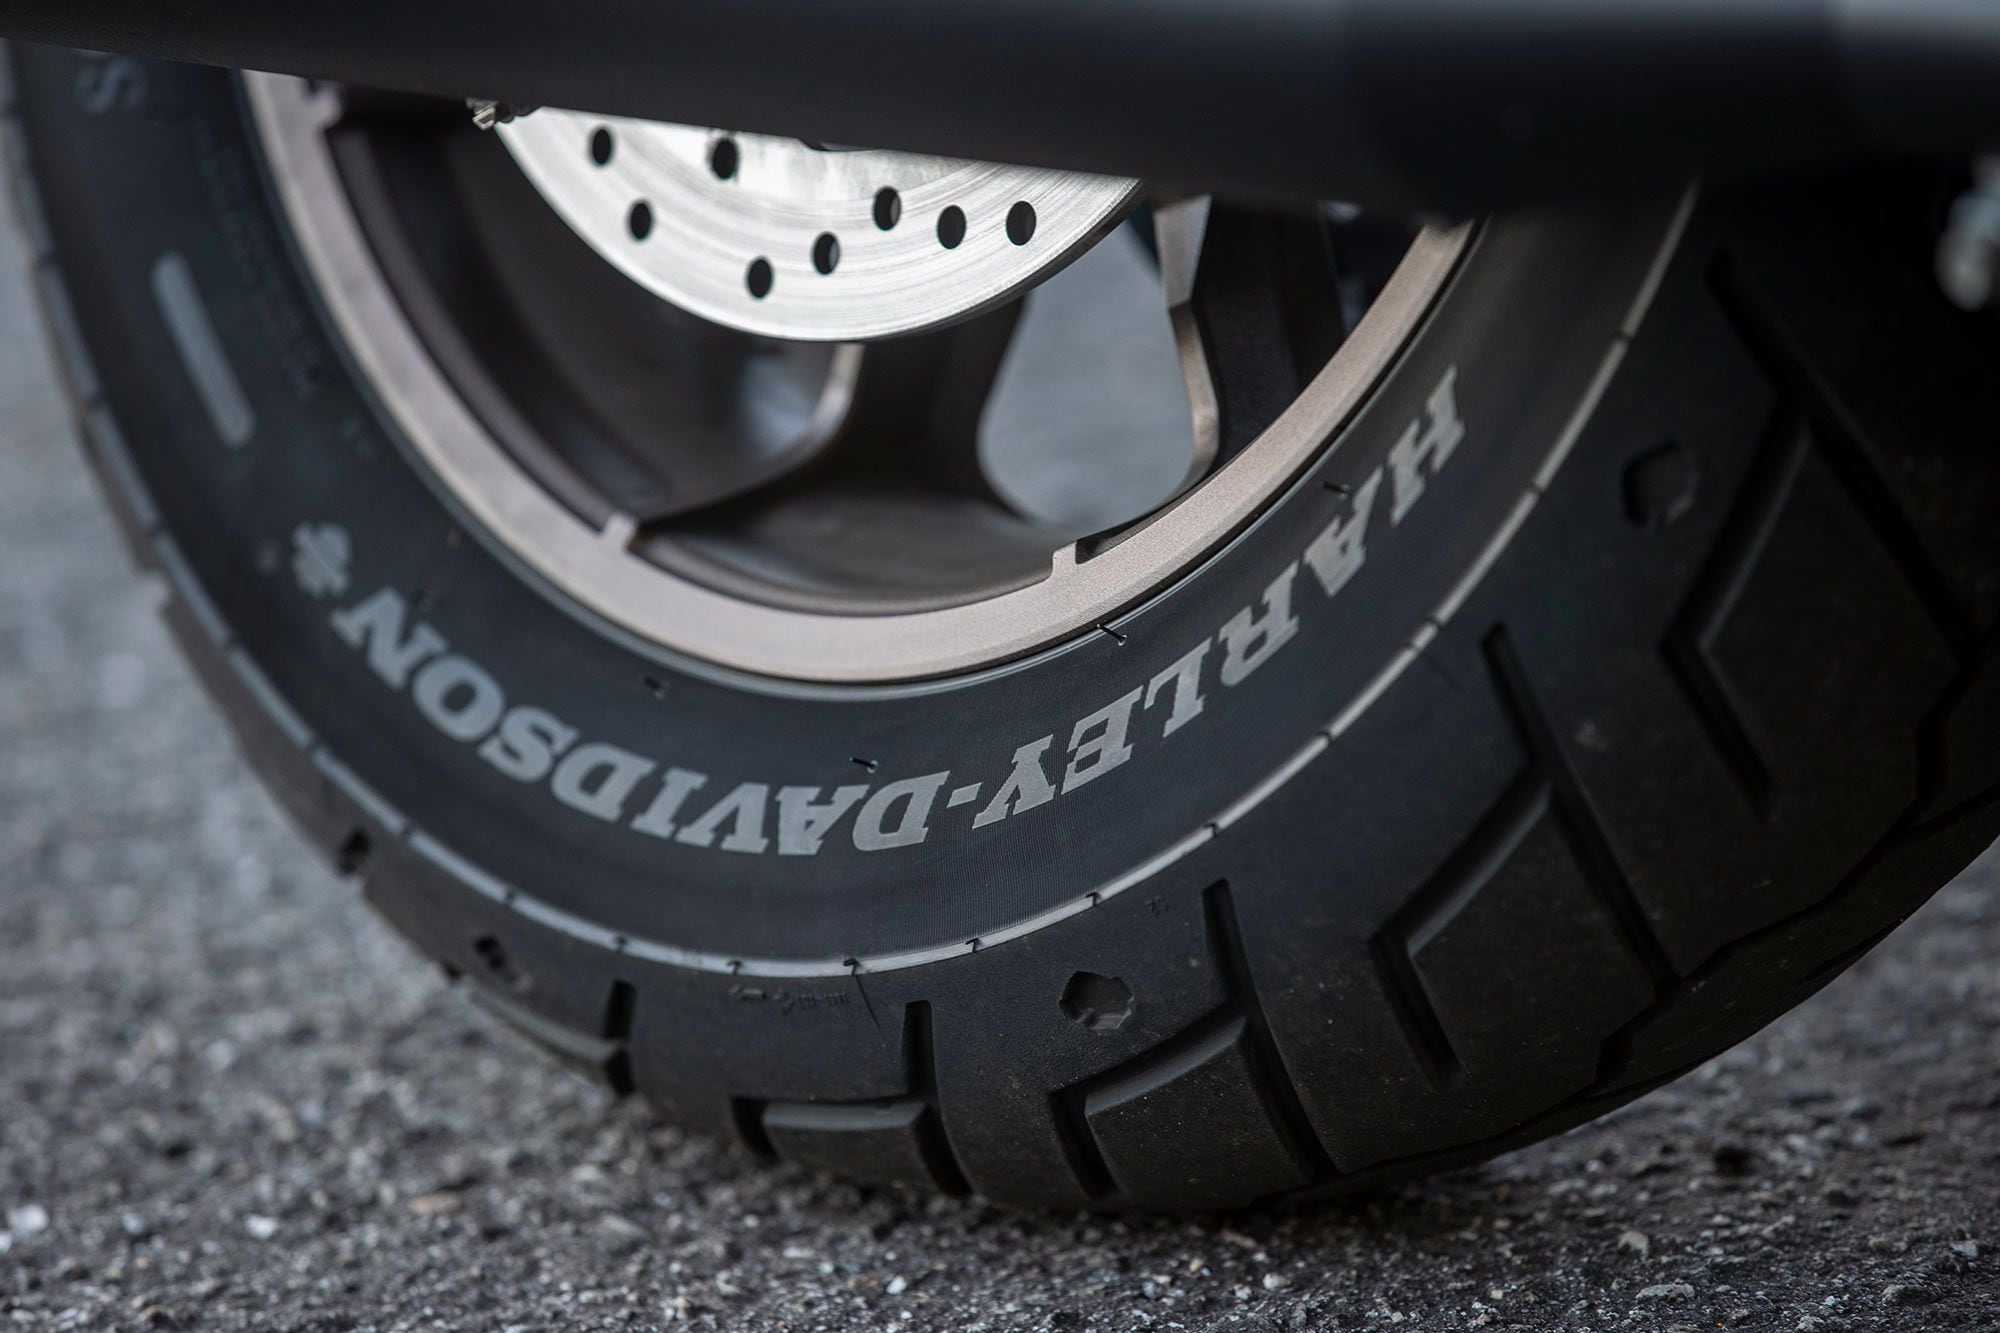 Increased lean angle helps riders take advantage of their whole tire’s tread.